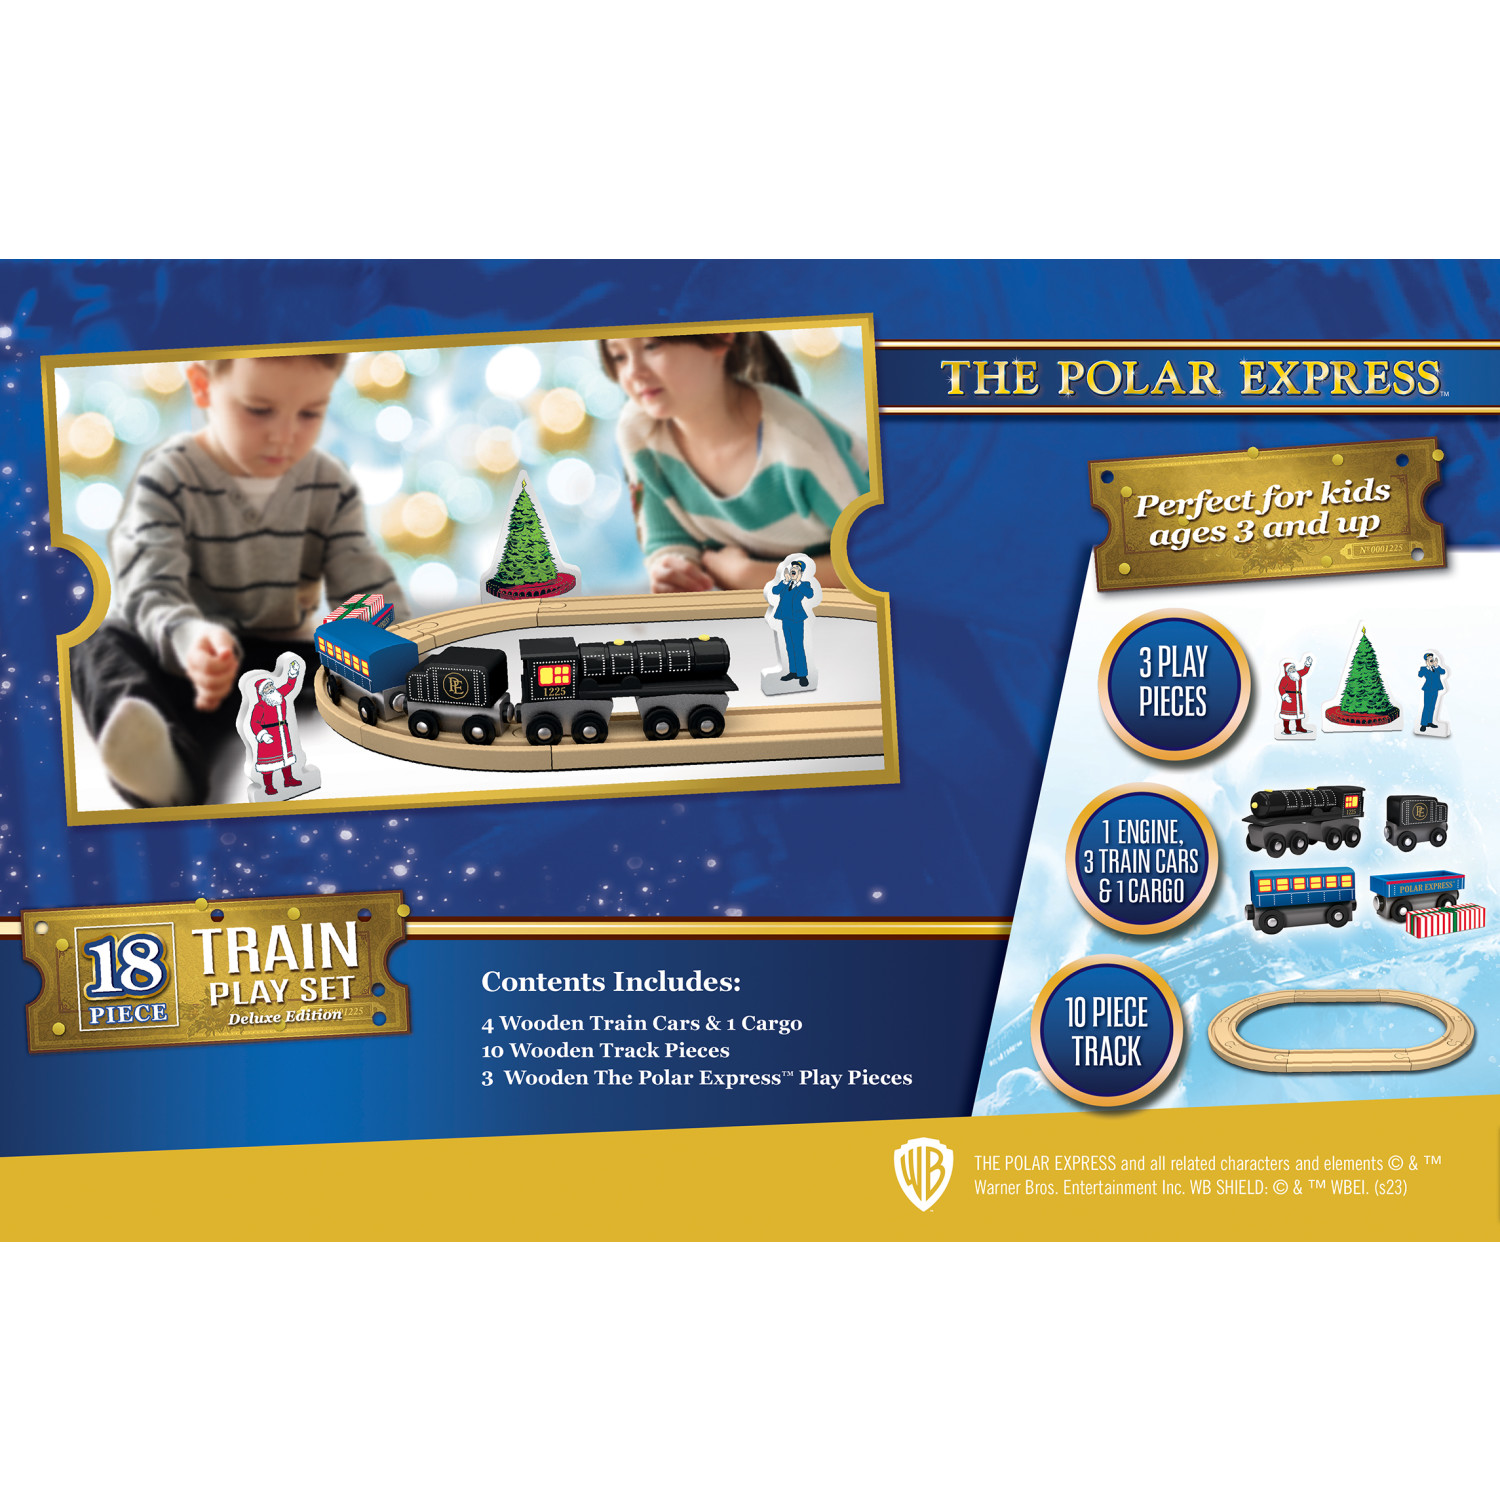 MasterPieces Wood Train Sets - The Polar Express 18 Piece Train Set - image 4 of 4